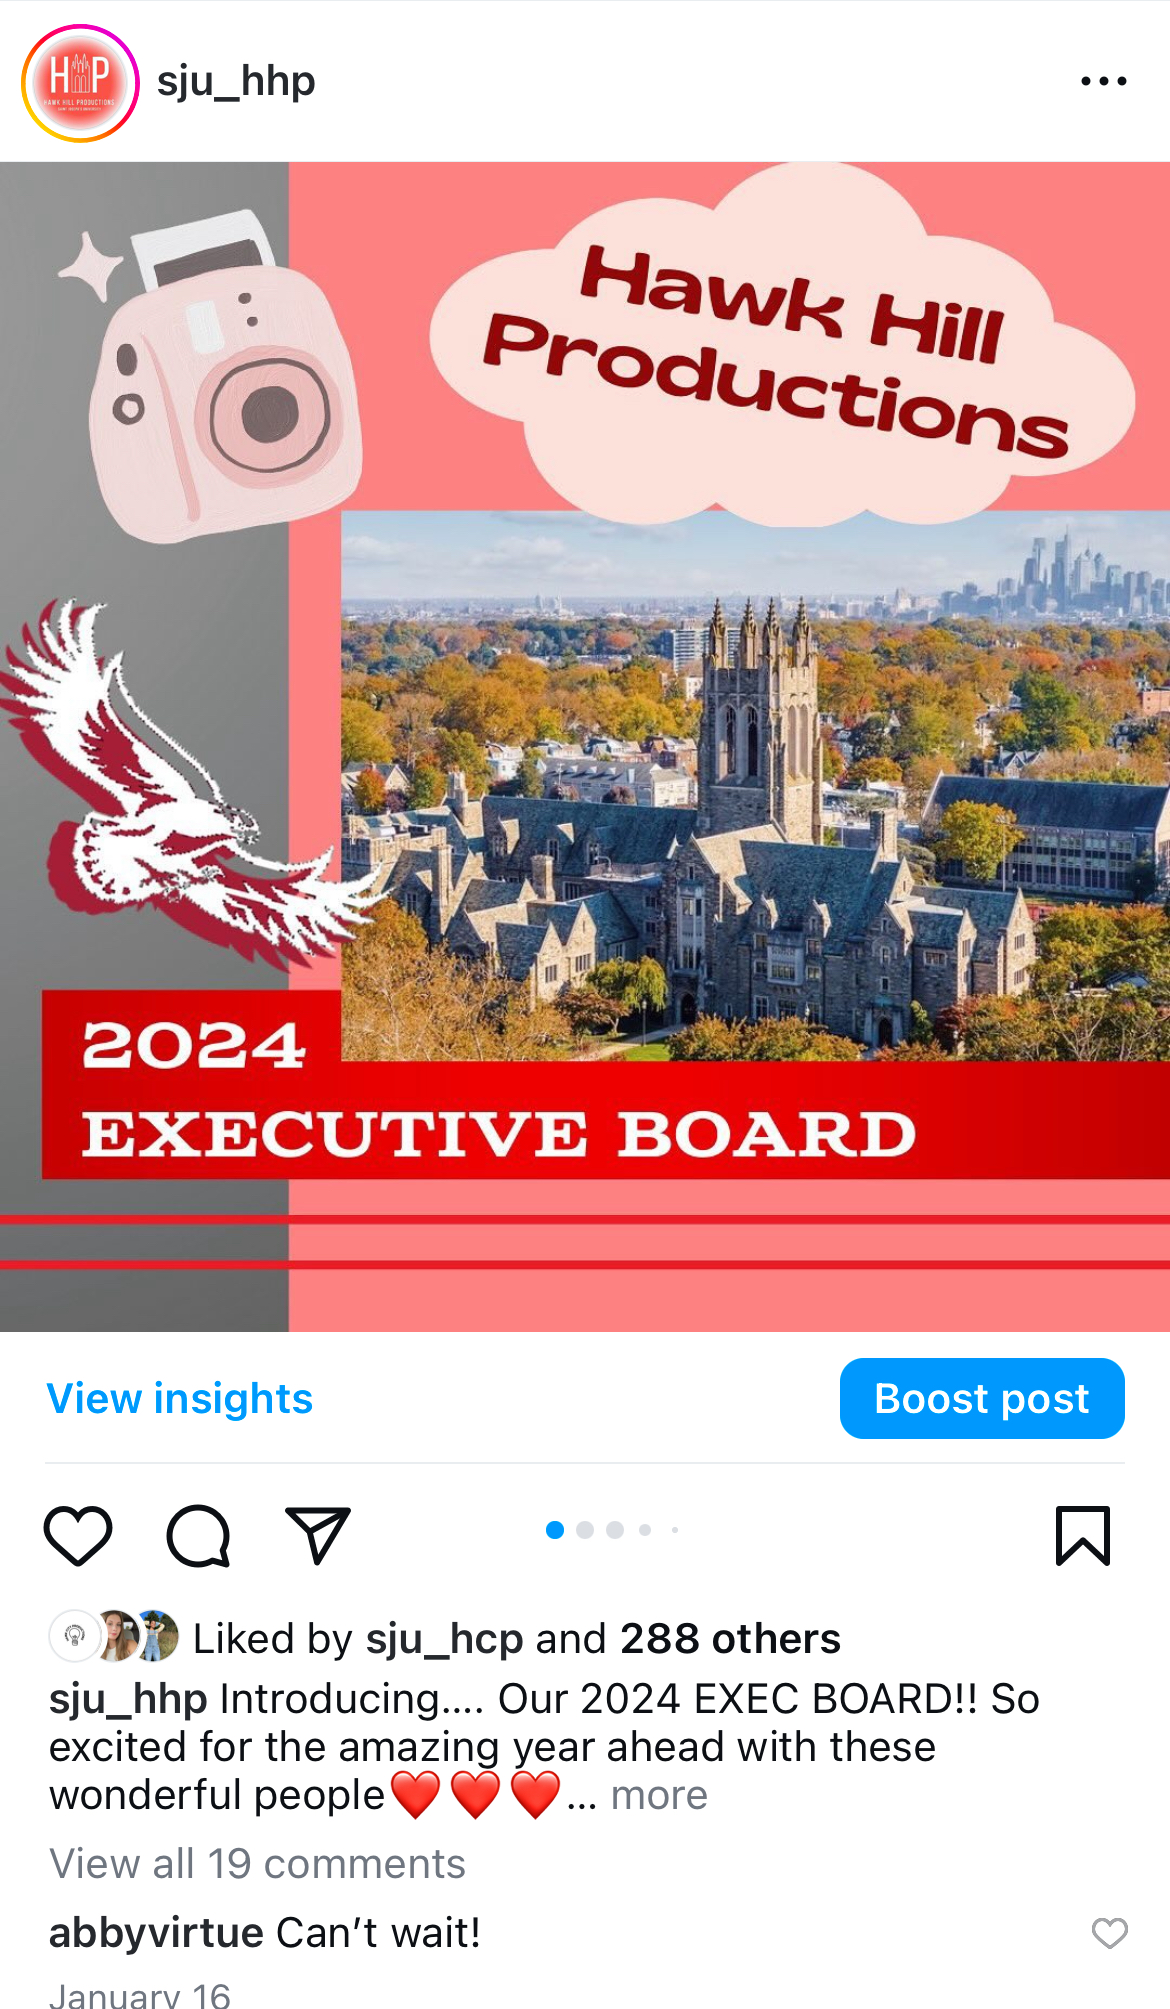 This image is an instagram post revealing the executive board for Hawk Hill Productions in 2024. The cover slide of the post features an above image of SJU's campus, with the Philadelphia skuline in the background. There is a hawk on the left side of the image. You can also see comments underneath the post from various followers